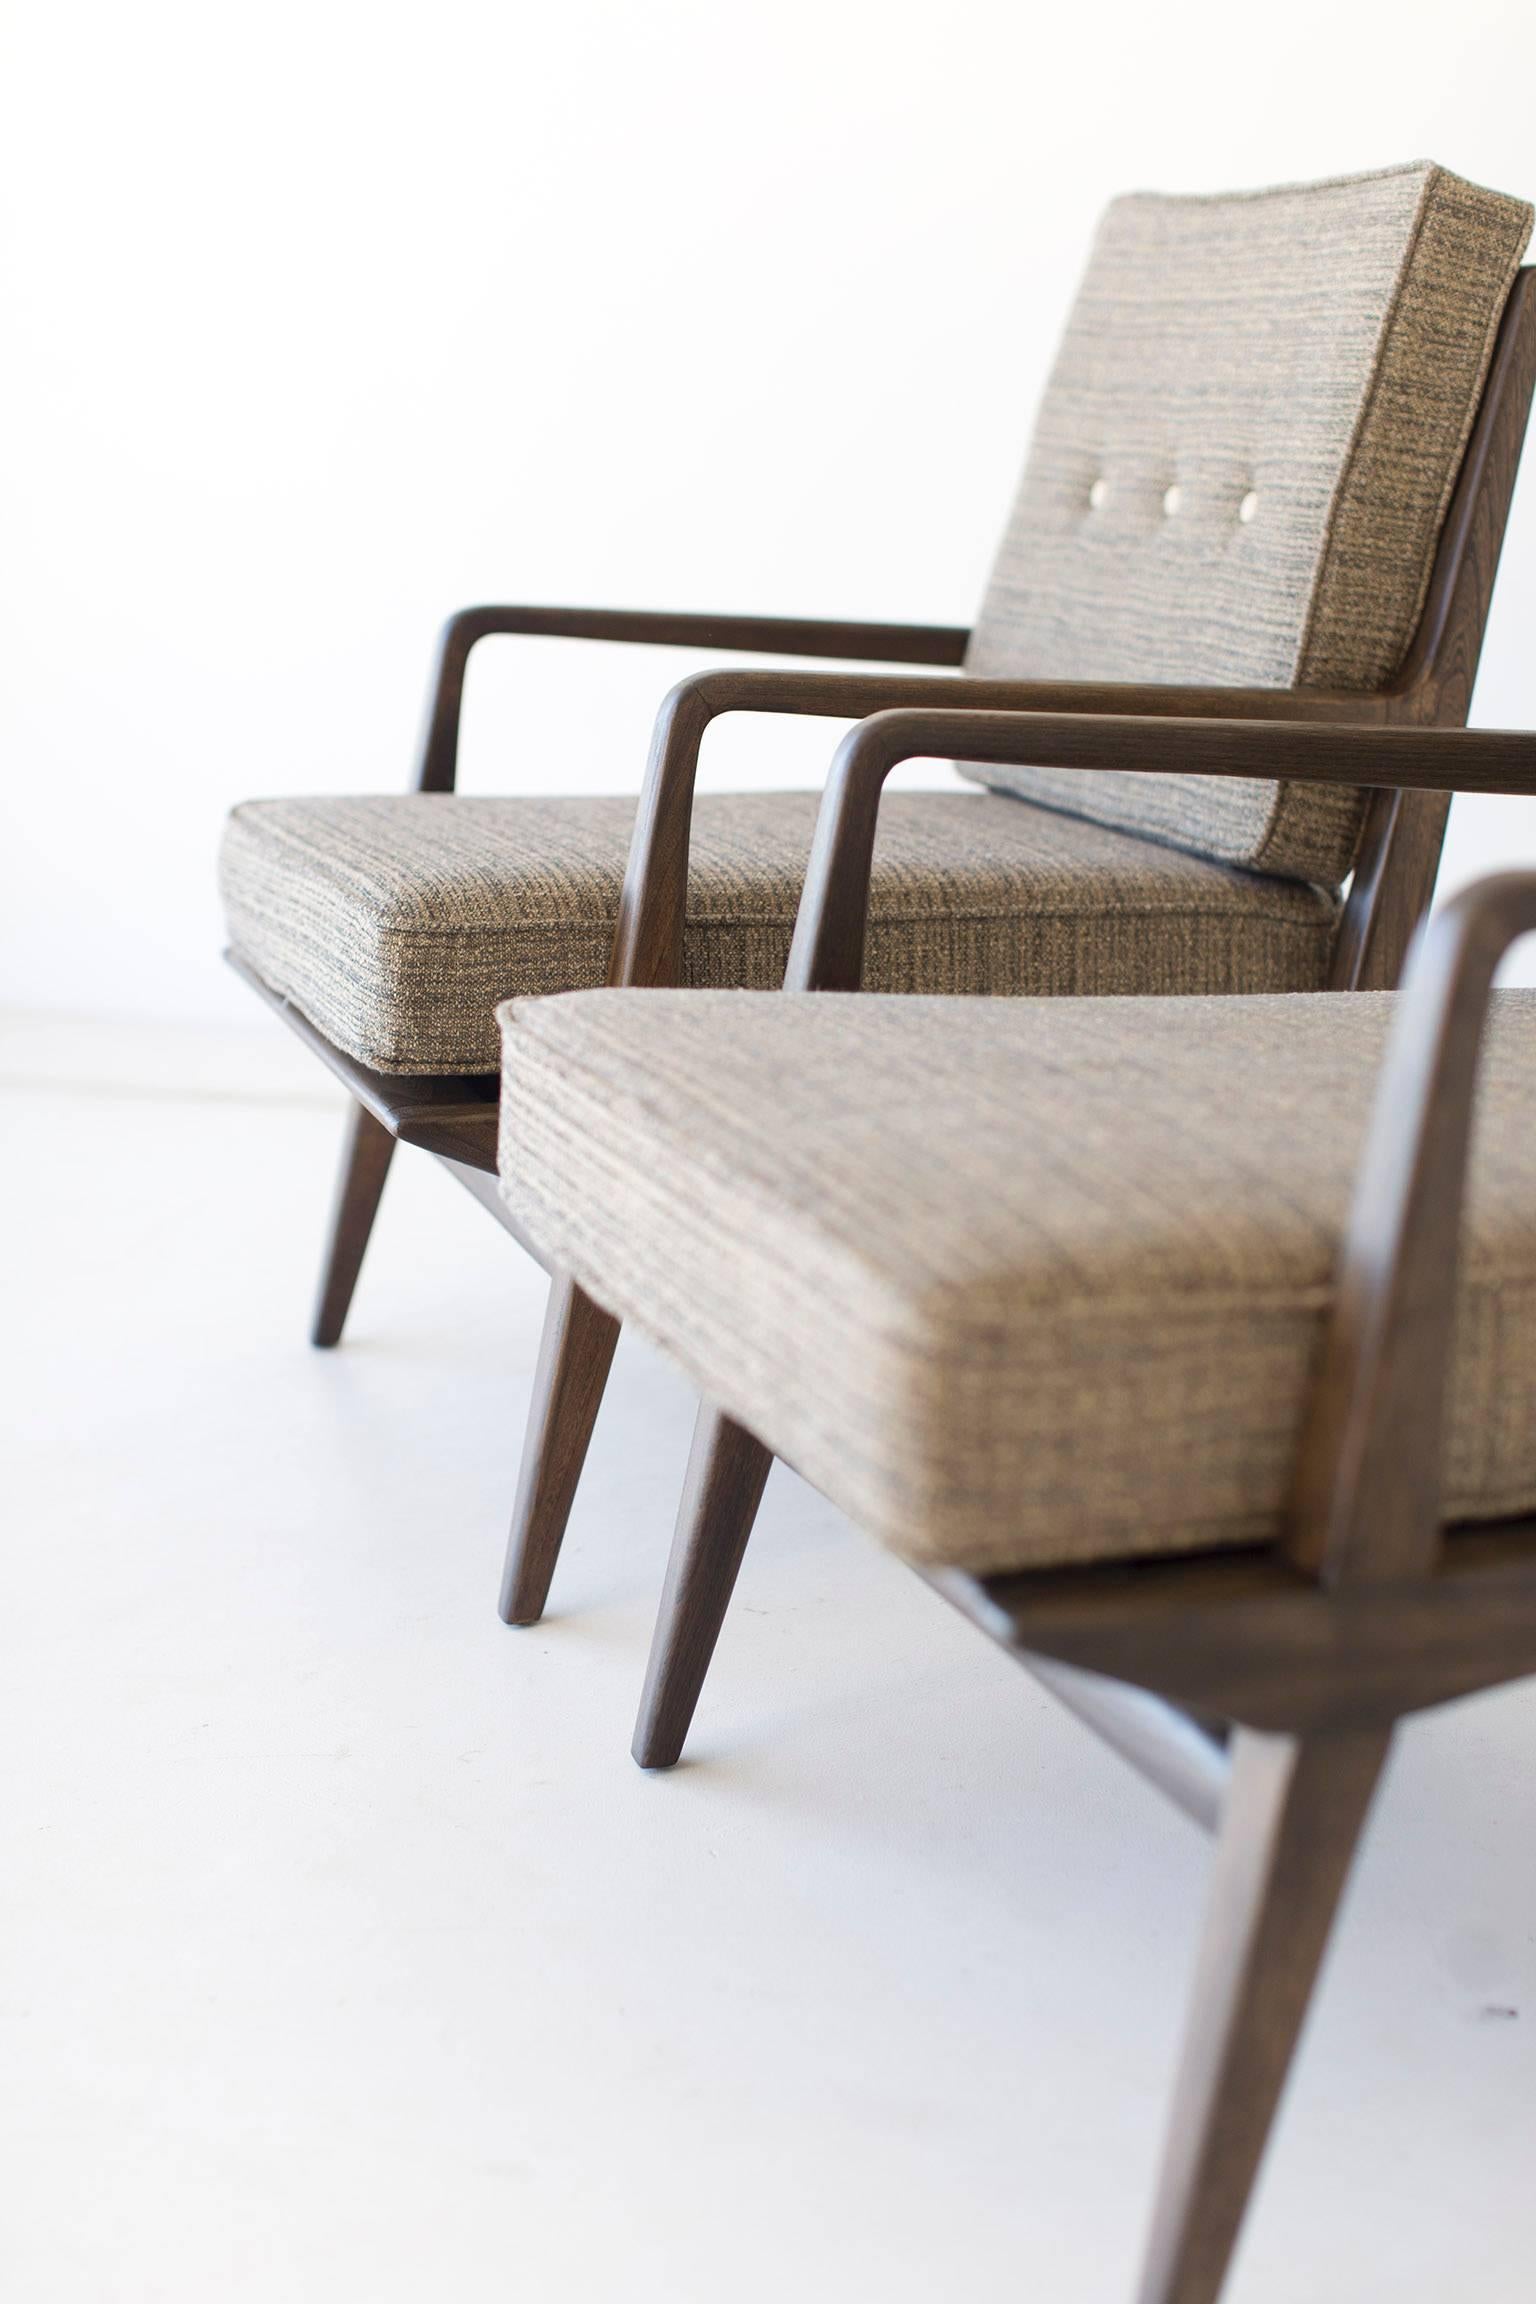 Designer: Carlo de Carli. 

Manufacturer: M. Singer & Sons
Period and model: Mid-Century Modern. 
Specifications: Fabric, wood. 

Condition: 

These Carlo de Carli lounge chairs for M. Singer & Sons are in excellent restored